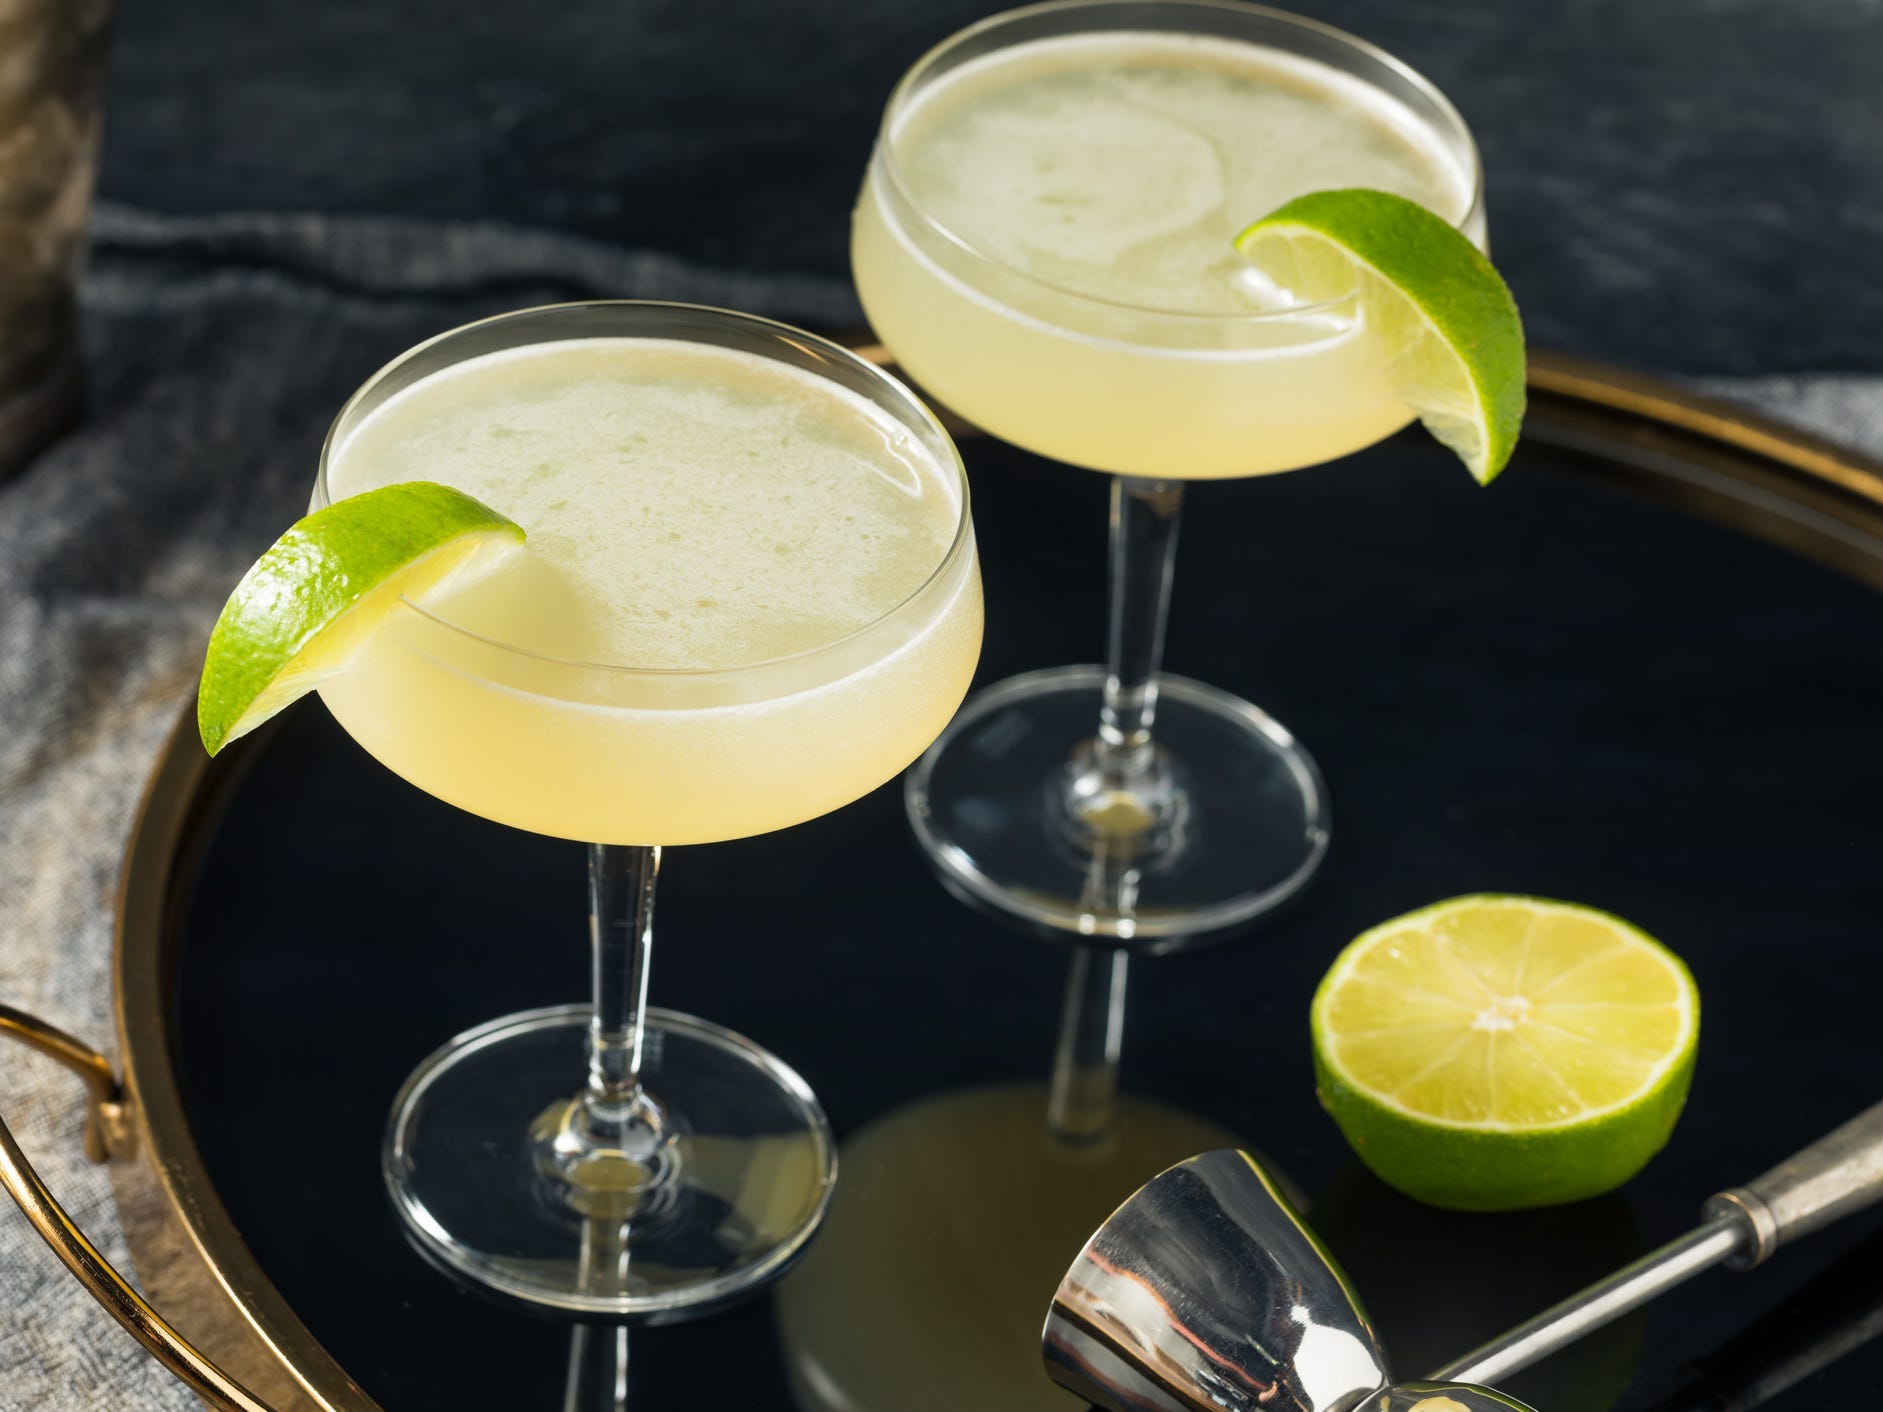 Two glasses of gimlet cocktail with lime garnishes.